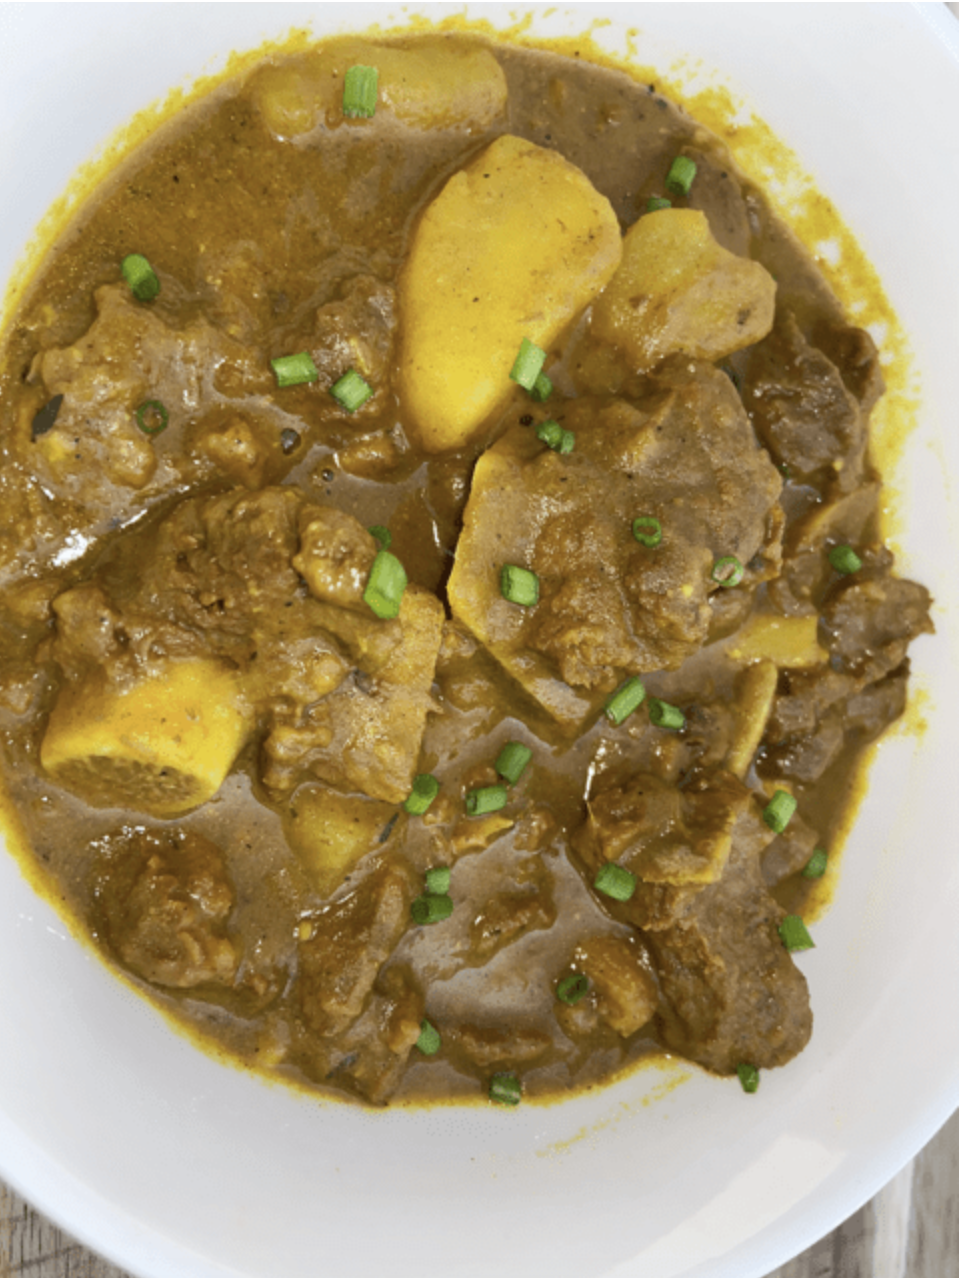 LARGE CURRY GOAT